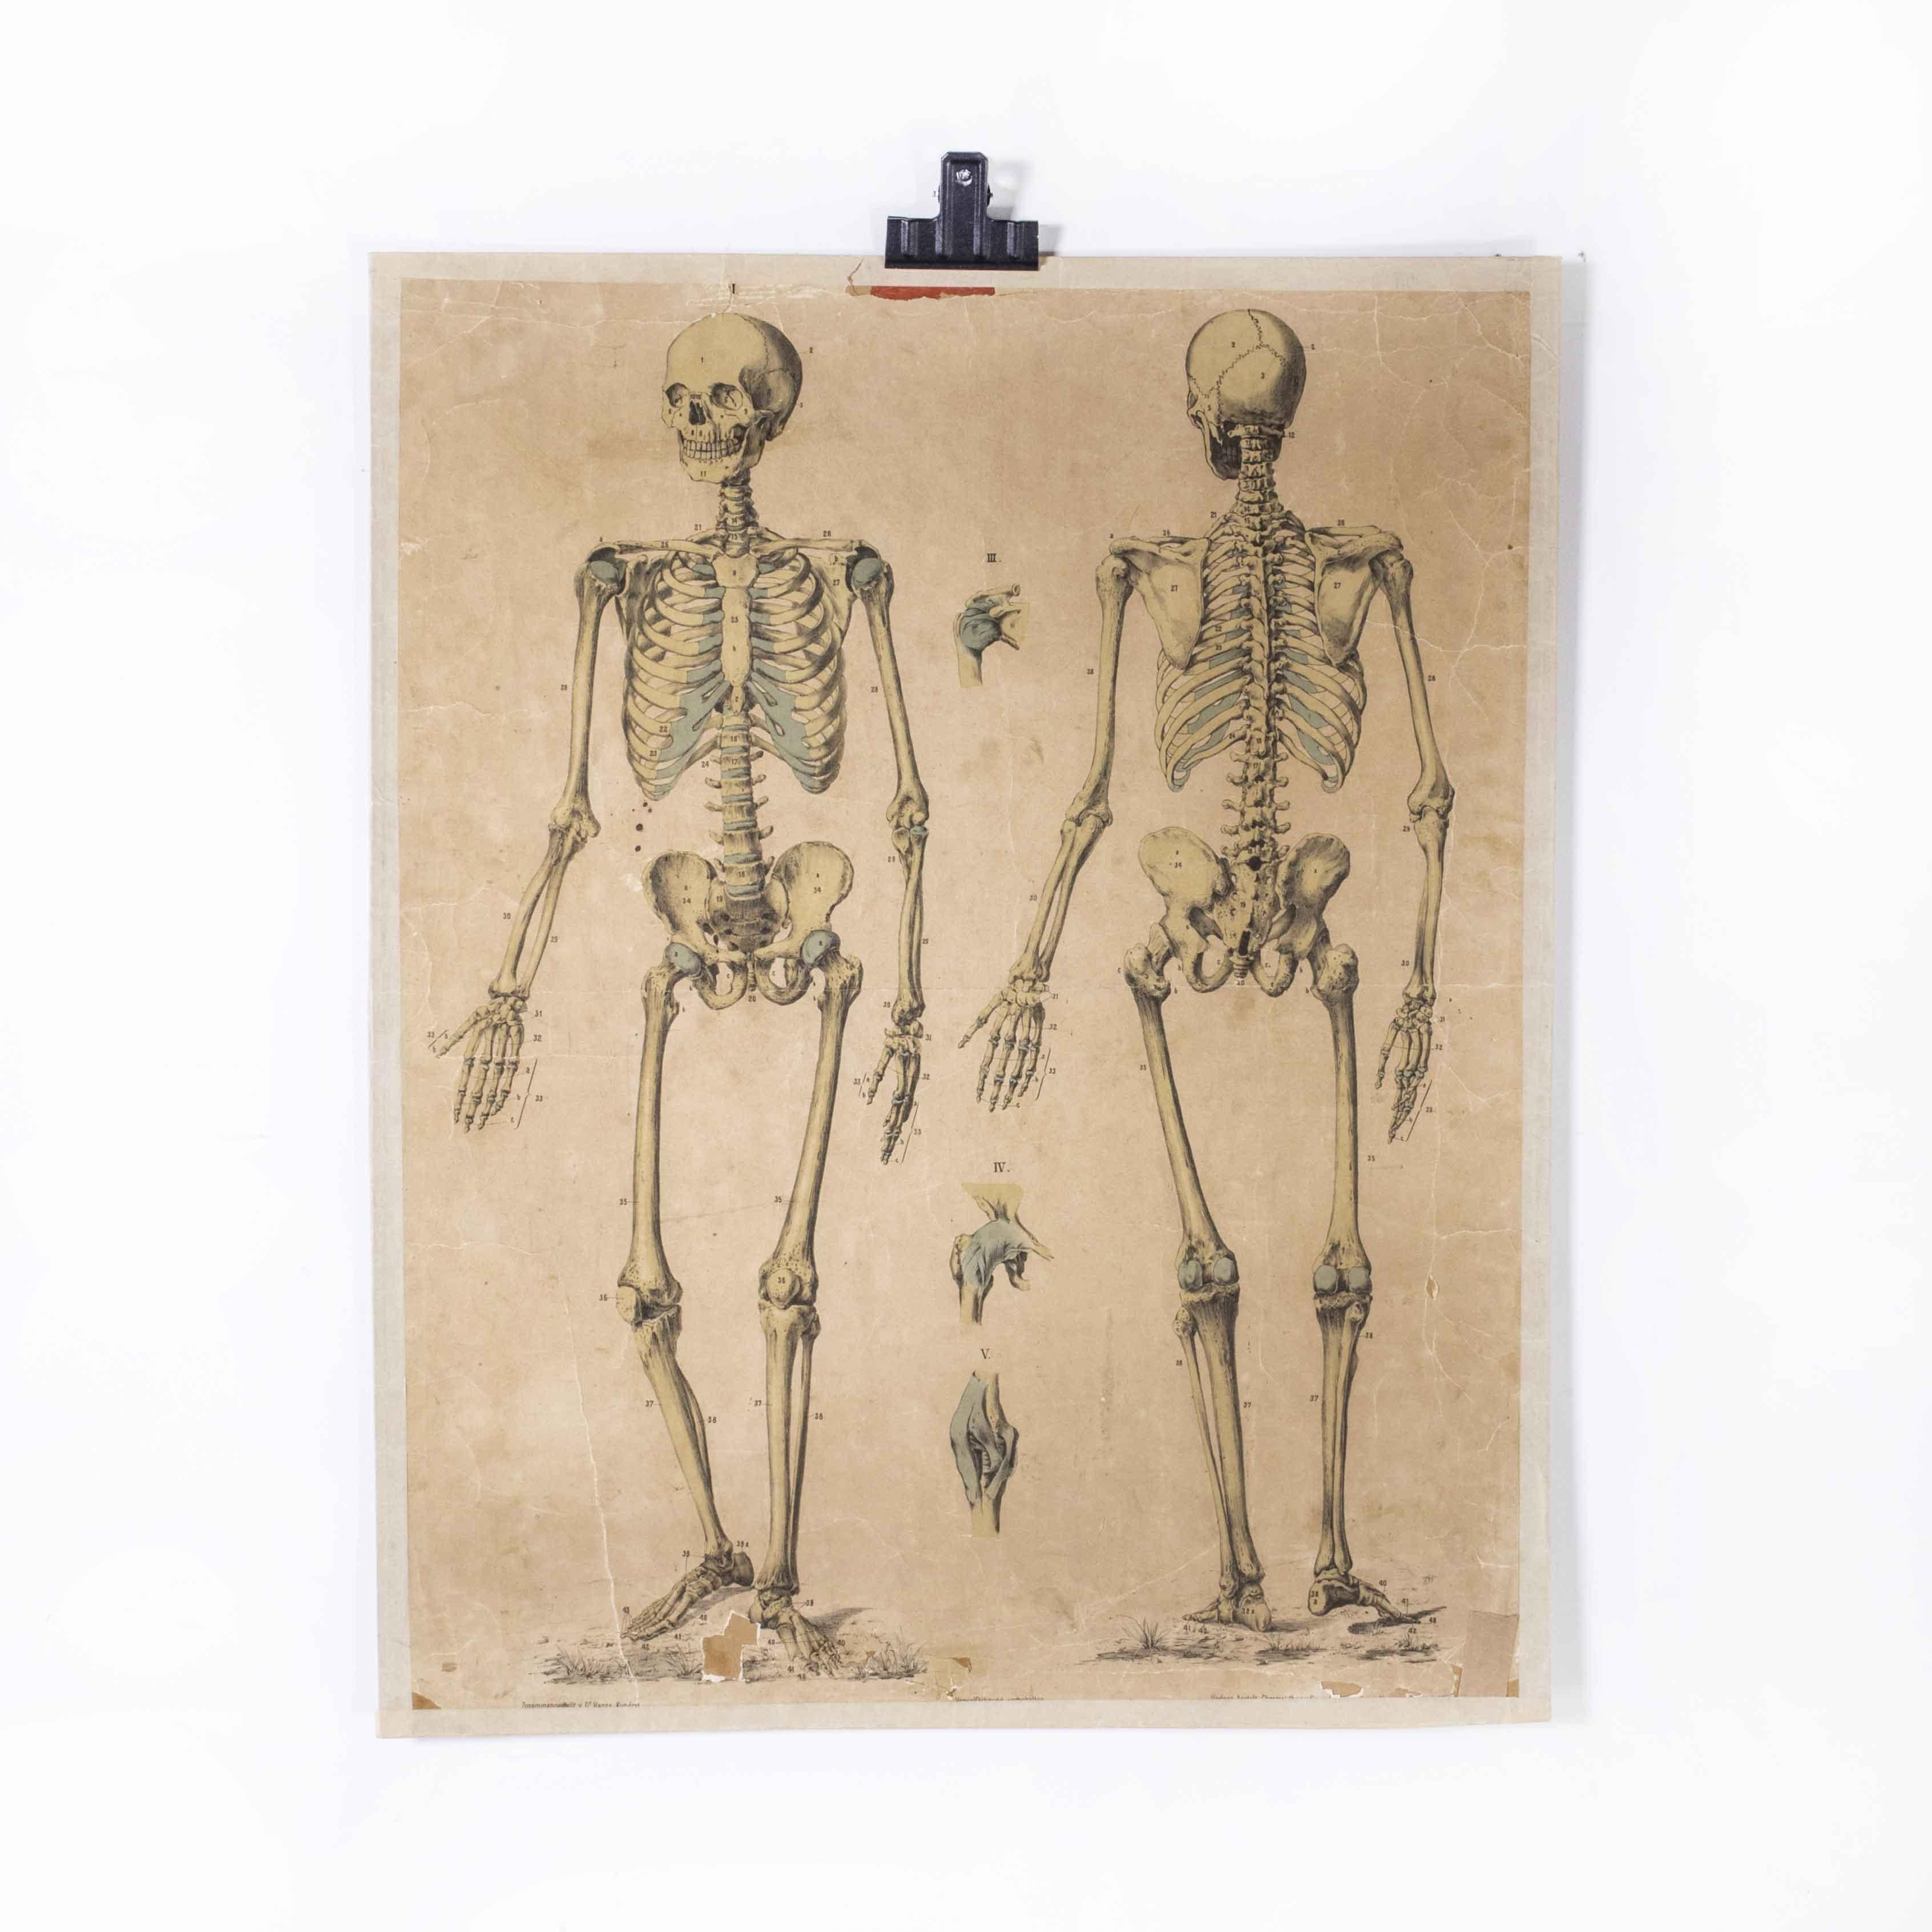 Early 20th century human skeleton front and back educational poster
Early 20th century human skeleton front and back educational poster. Early 20th century Czechoslovakian educational human anatomy chart. A rare and vintage wall chart from the